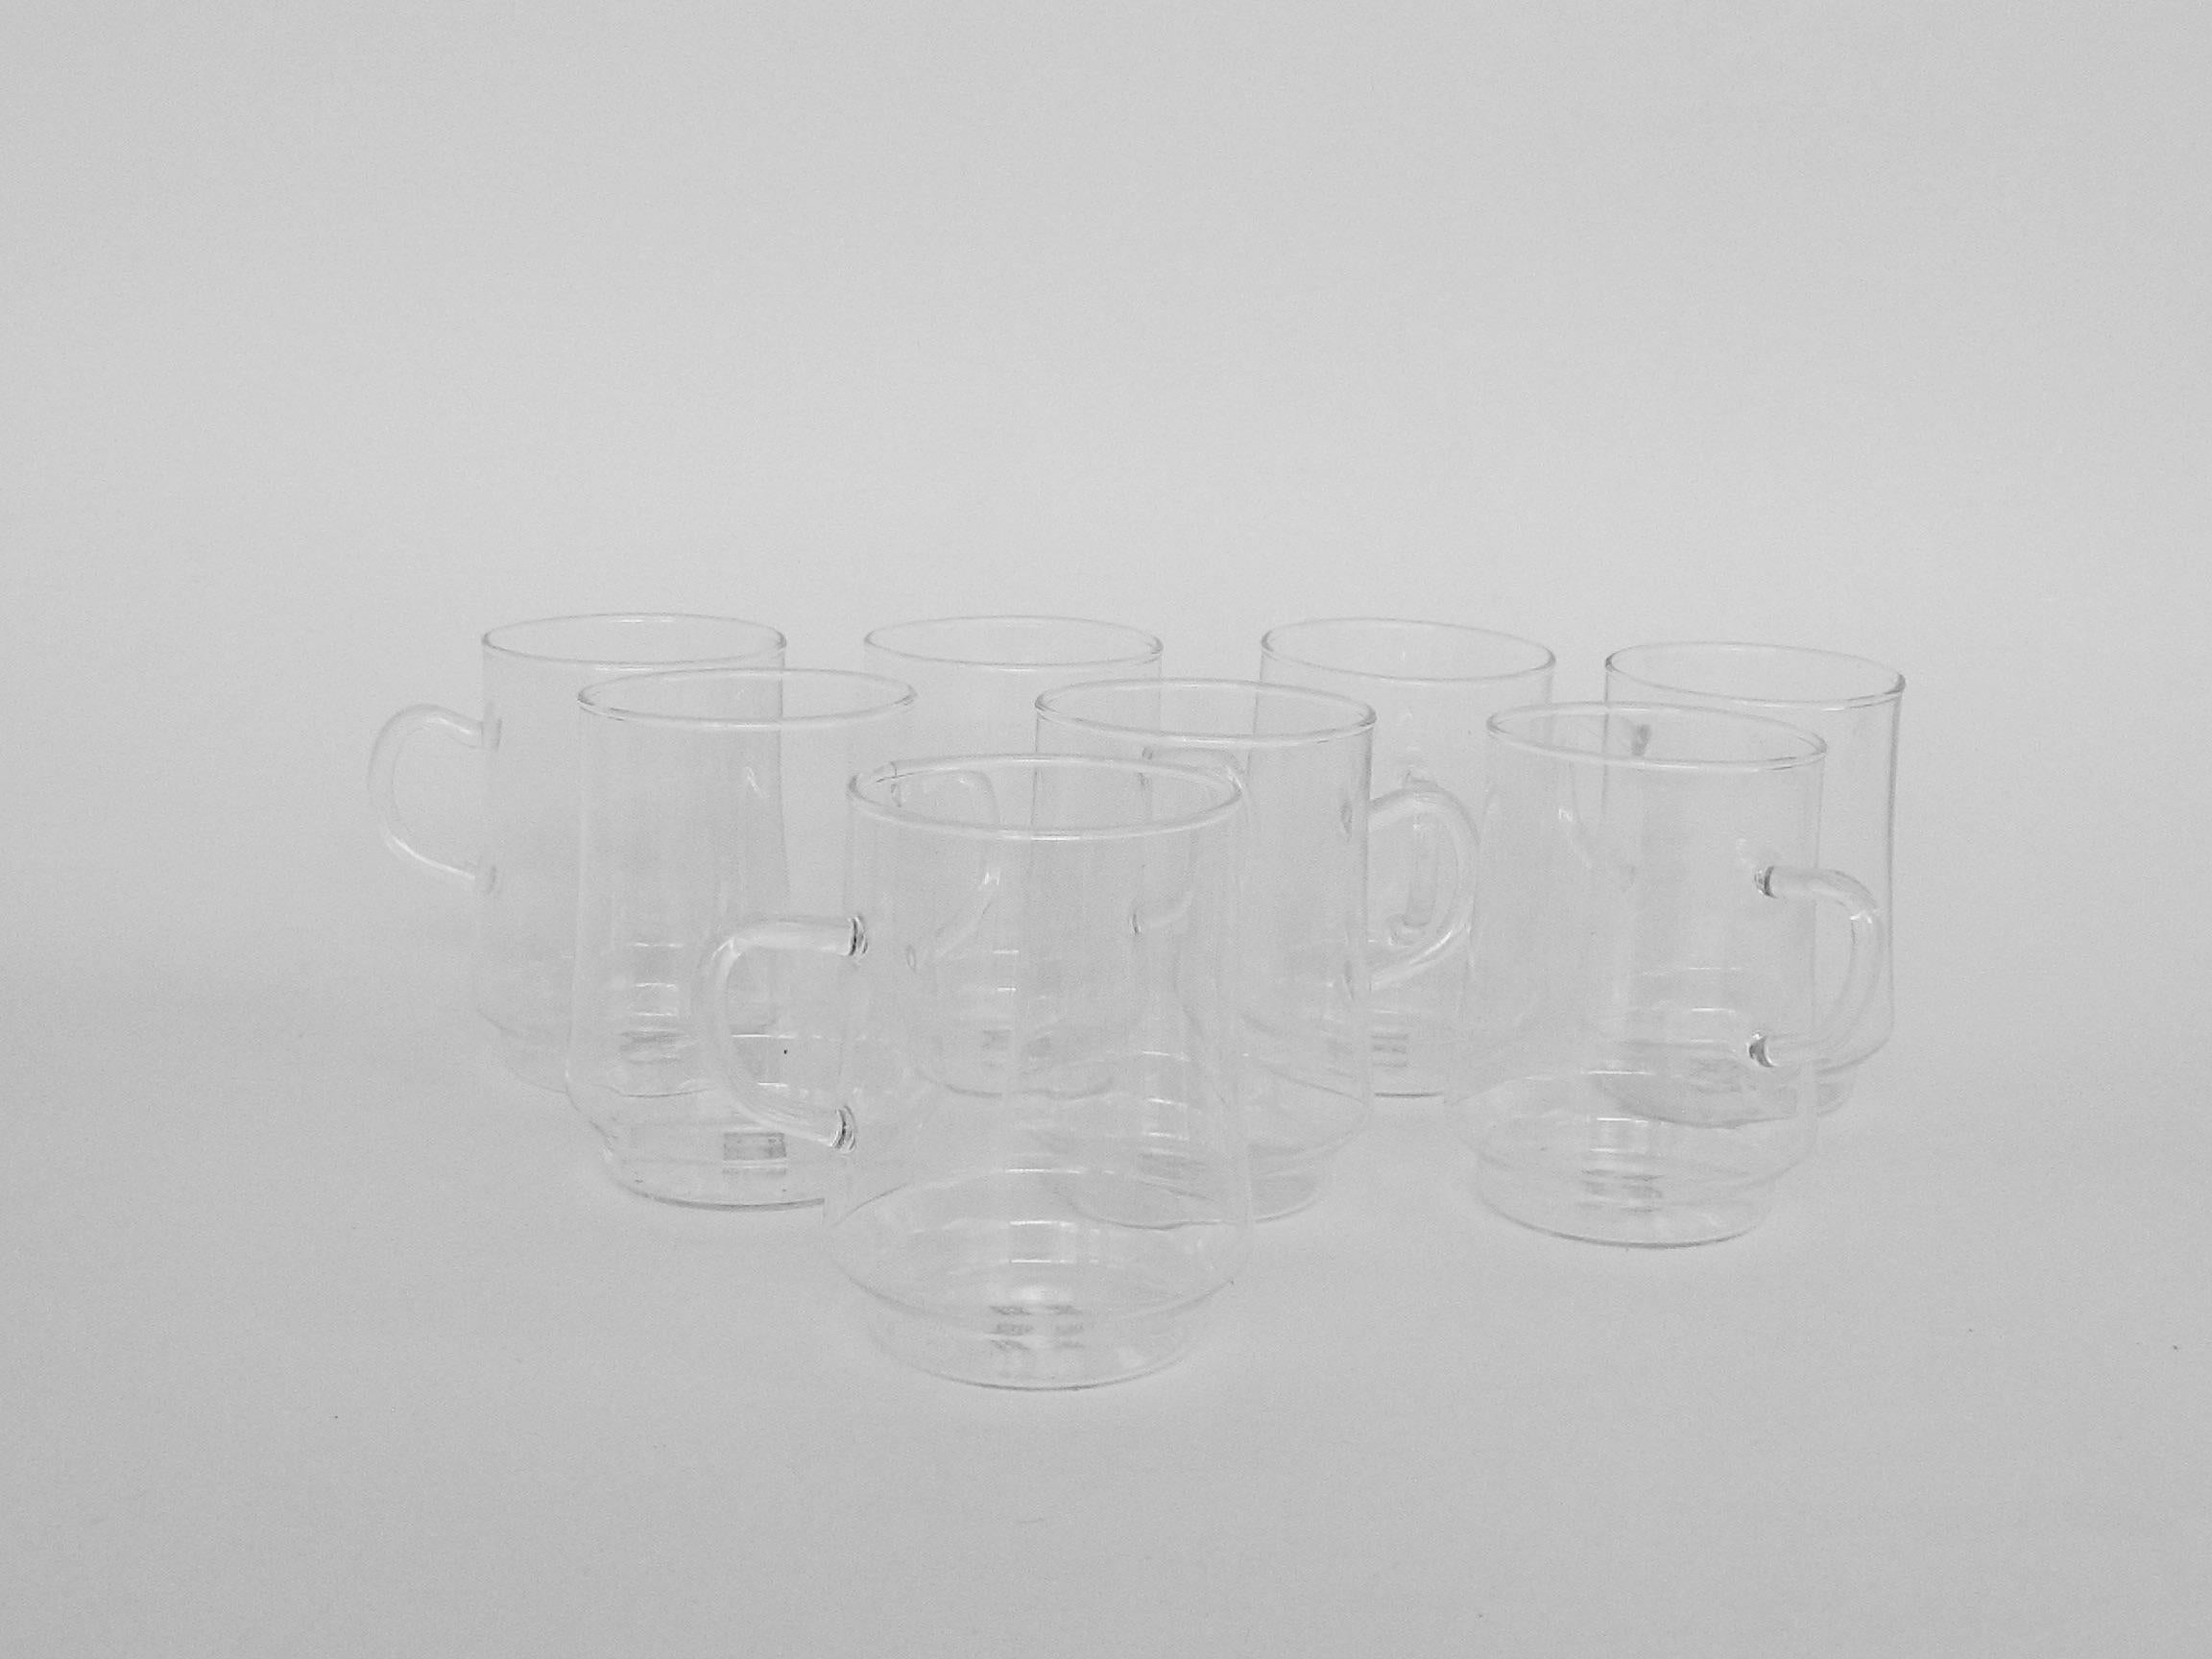 Set of Eight Vintage Hot Toddy Glasses With Colorful Handles